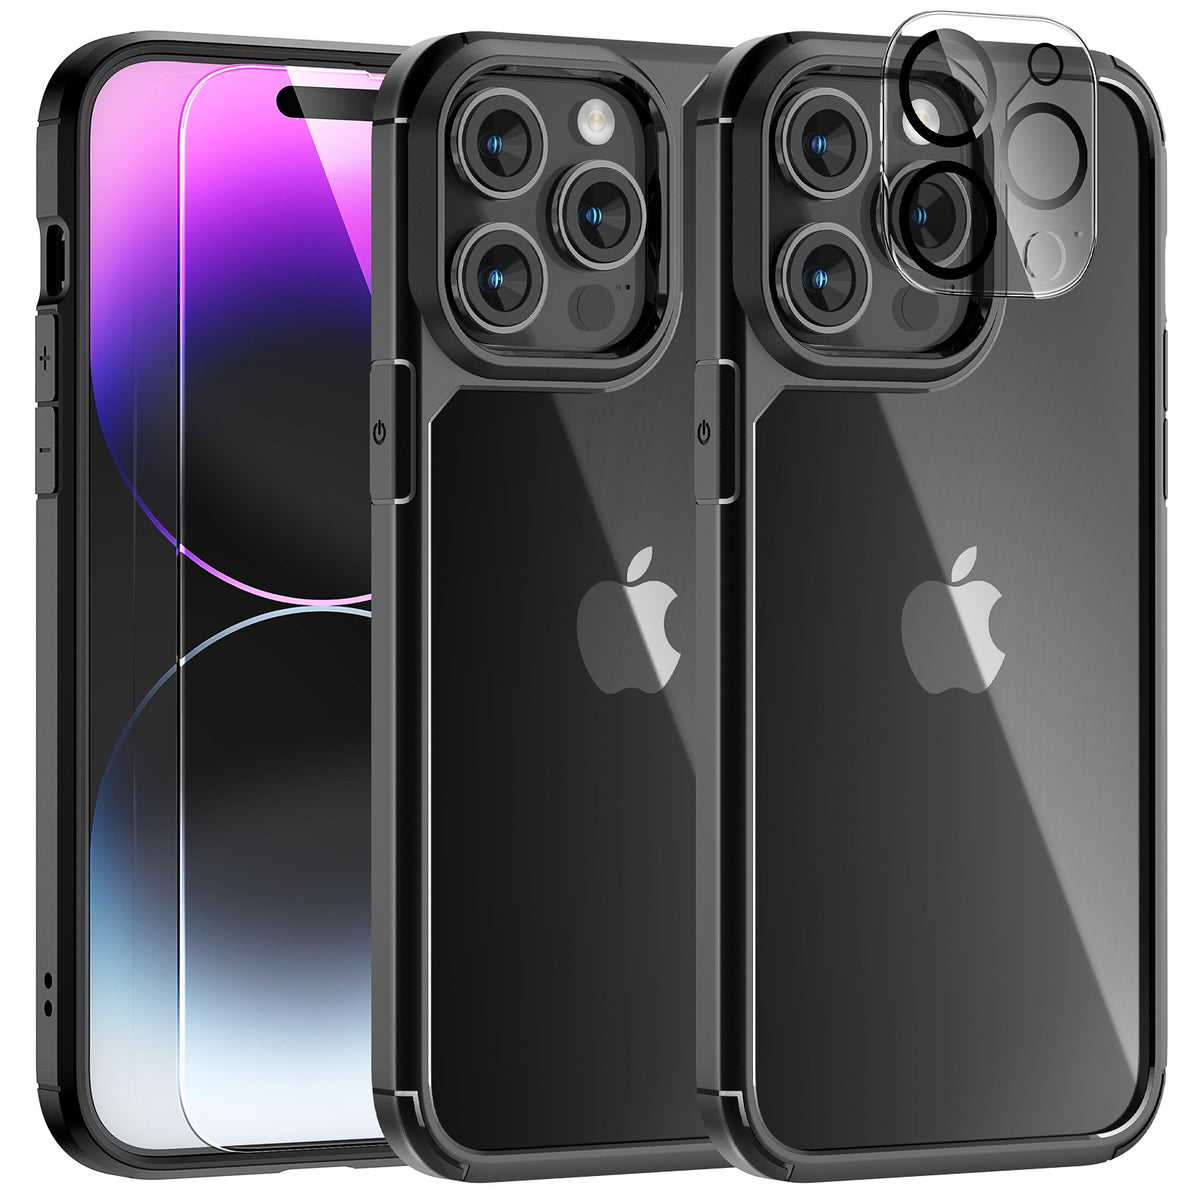 TAURI [5 in 1] for iPhone 14 Pro Max Case [Not Yellowing], with 2 Tempered Glass Screen Protectors + 2 Camera Lens Protectors [Military Grade Protection] Shockproof Slim 14 Pro Max 6.7 Inch, Black